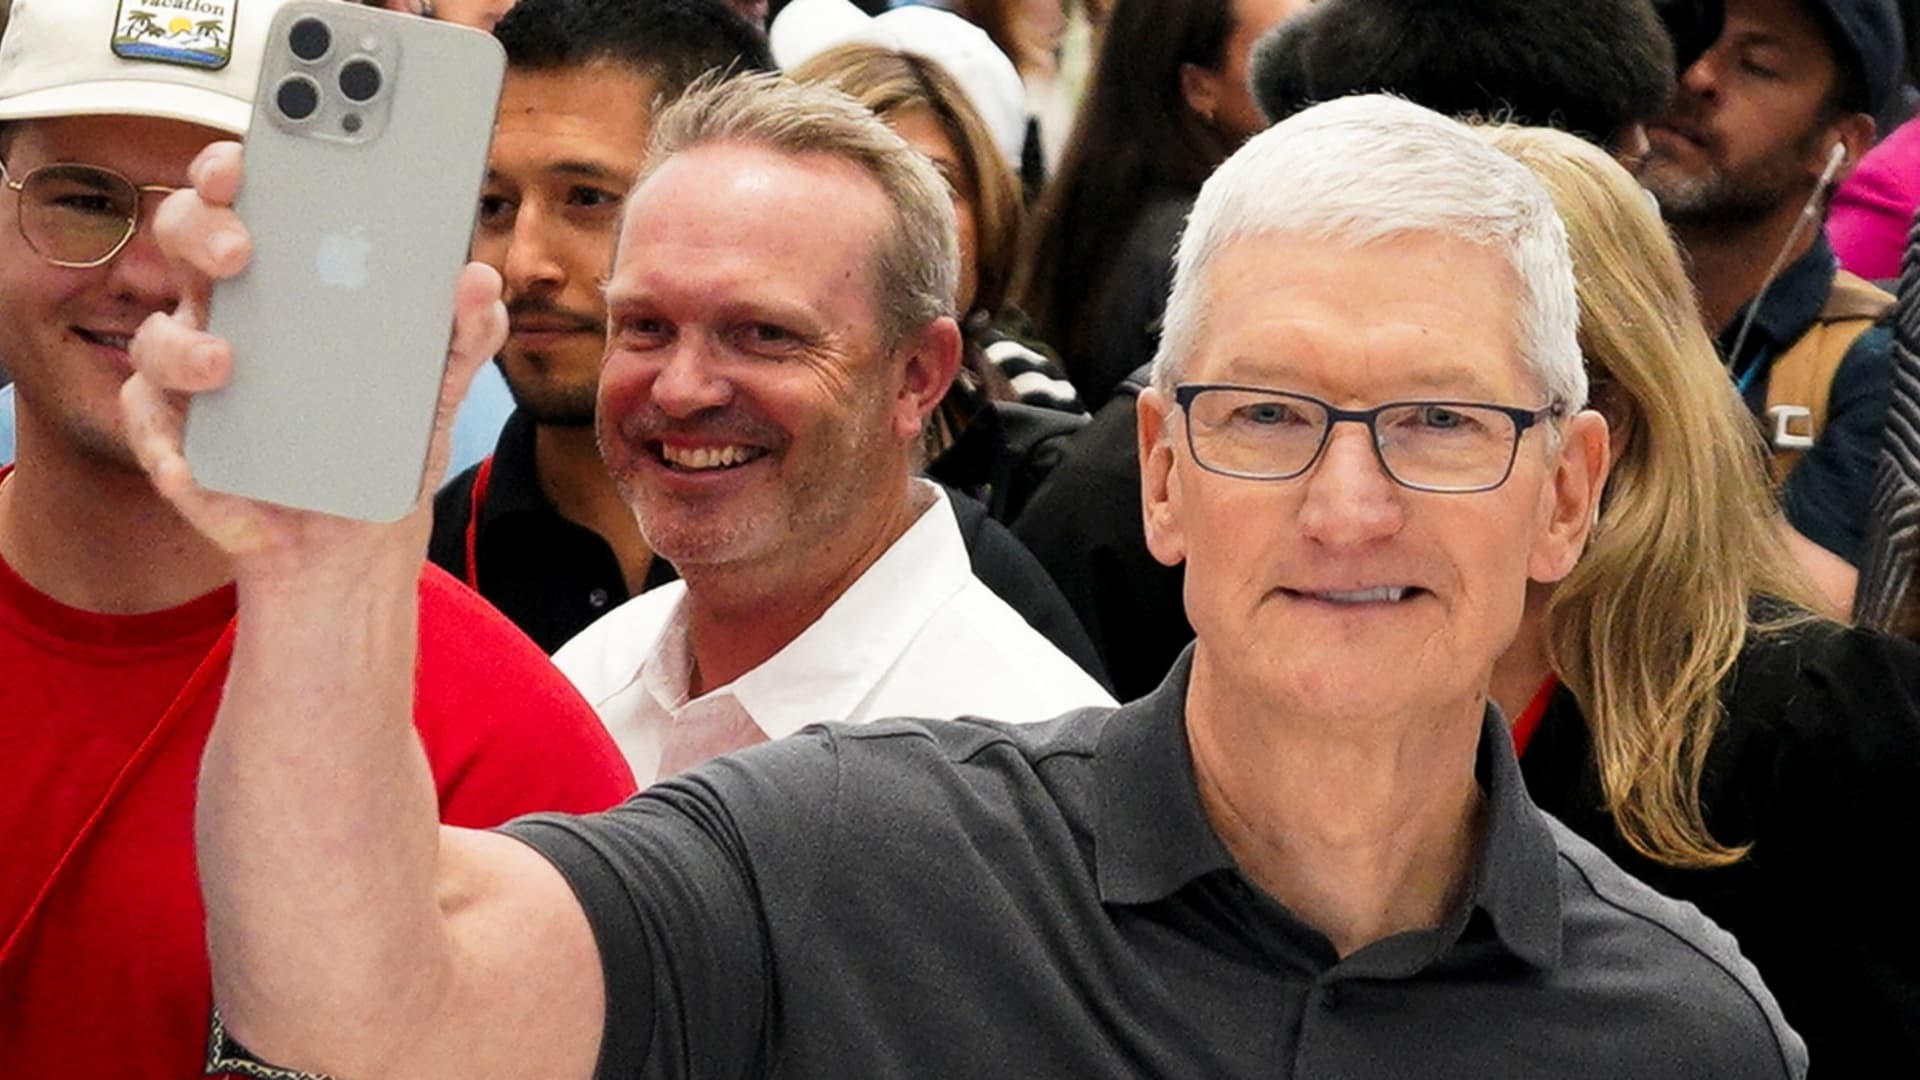 Apple will report earnings after the bell 